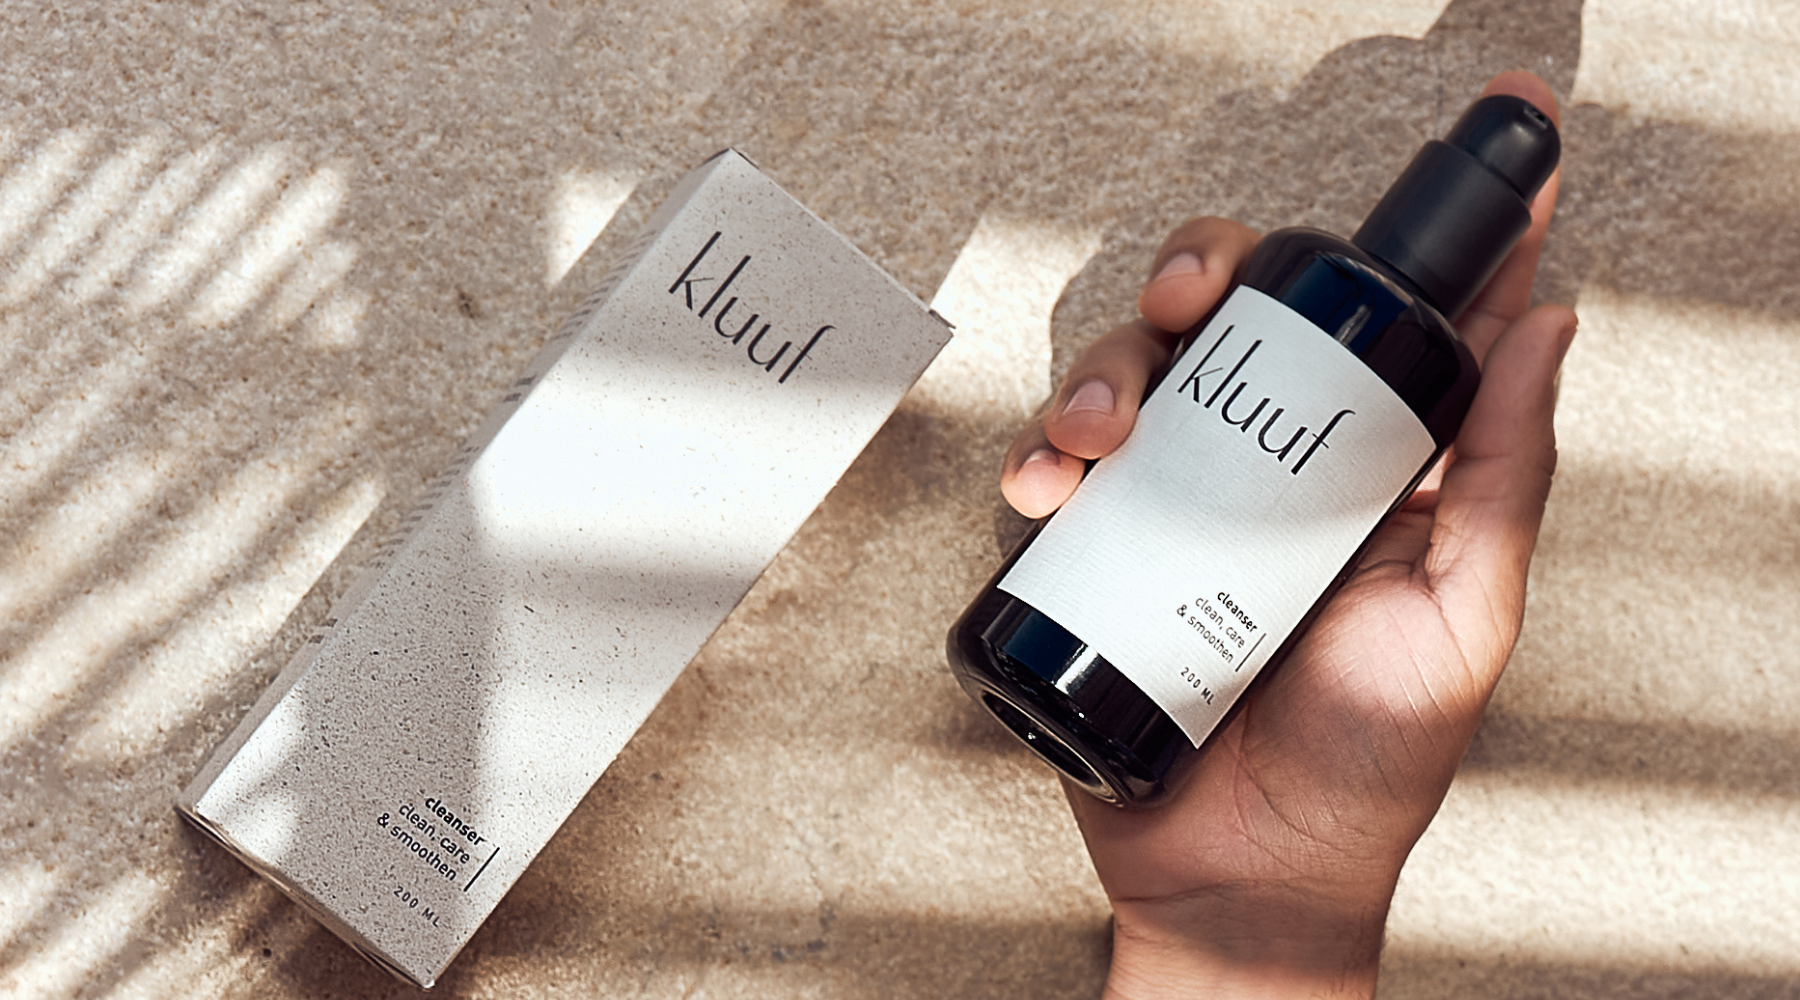 hand holding kluuf's gentle facial cleanser on ground with luxurious packaging and shadow